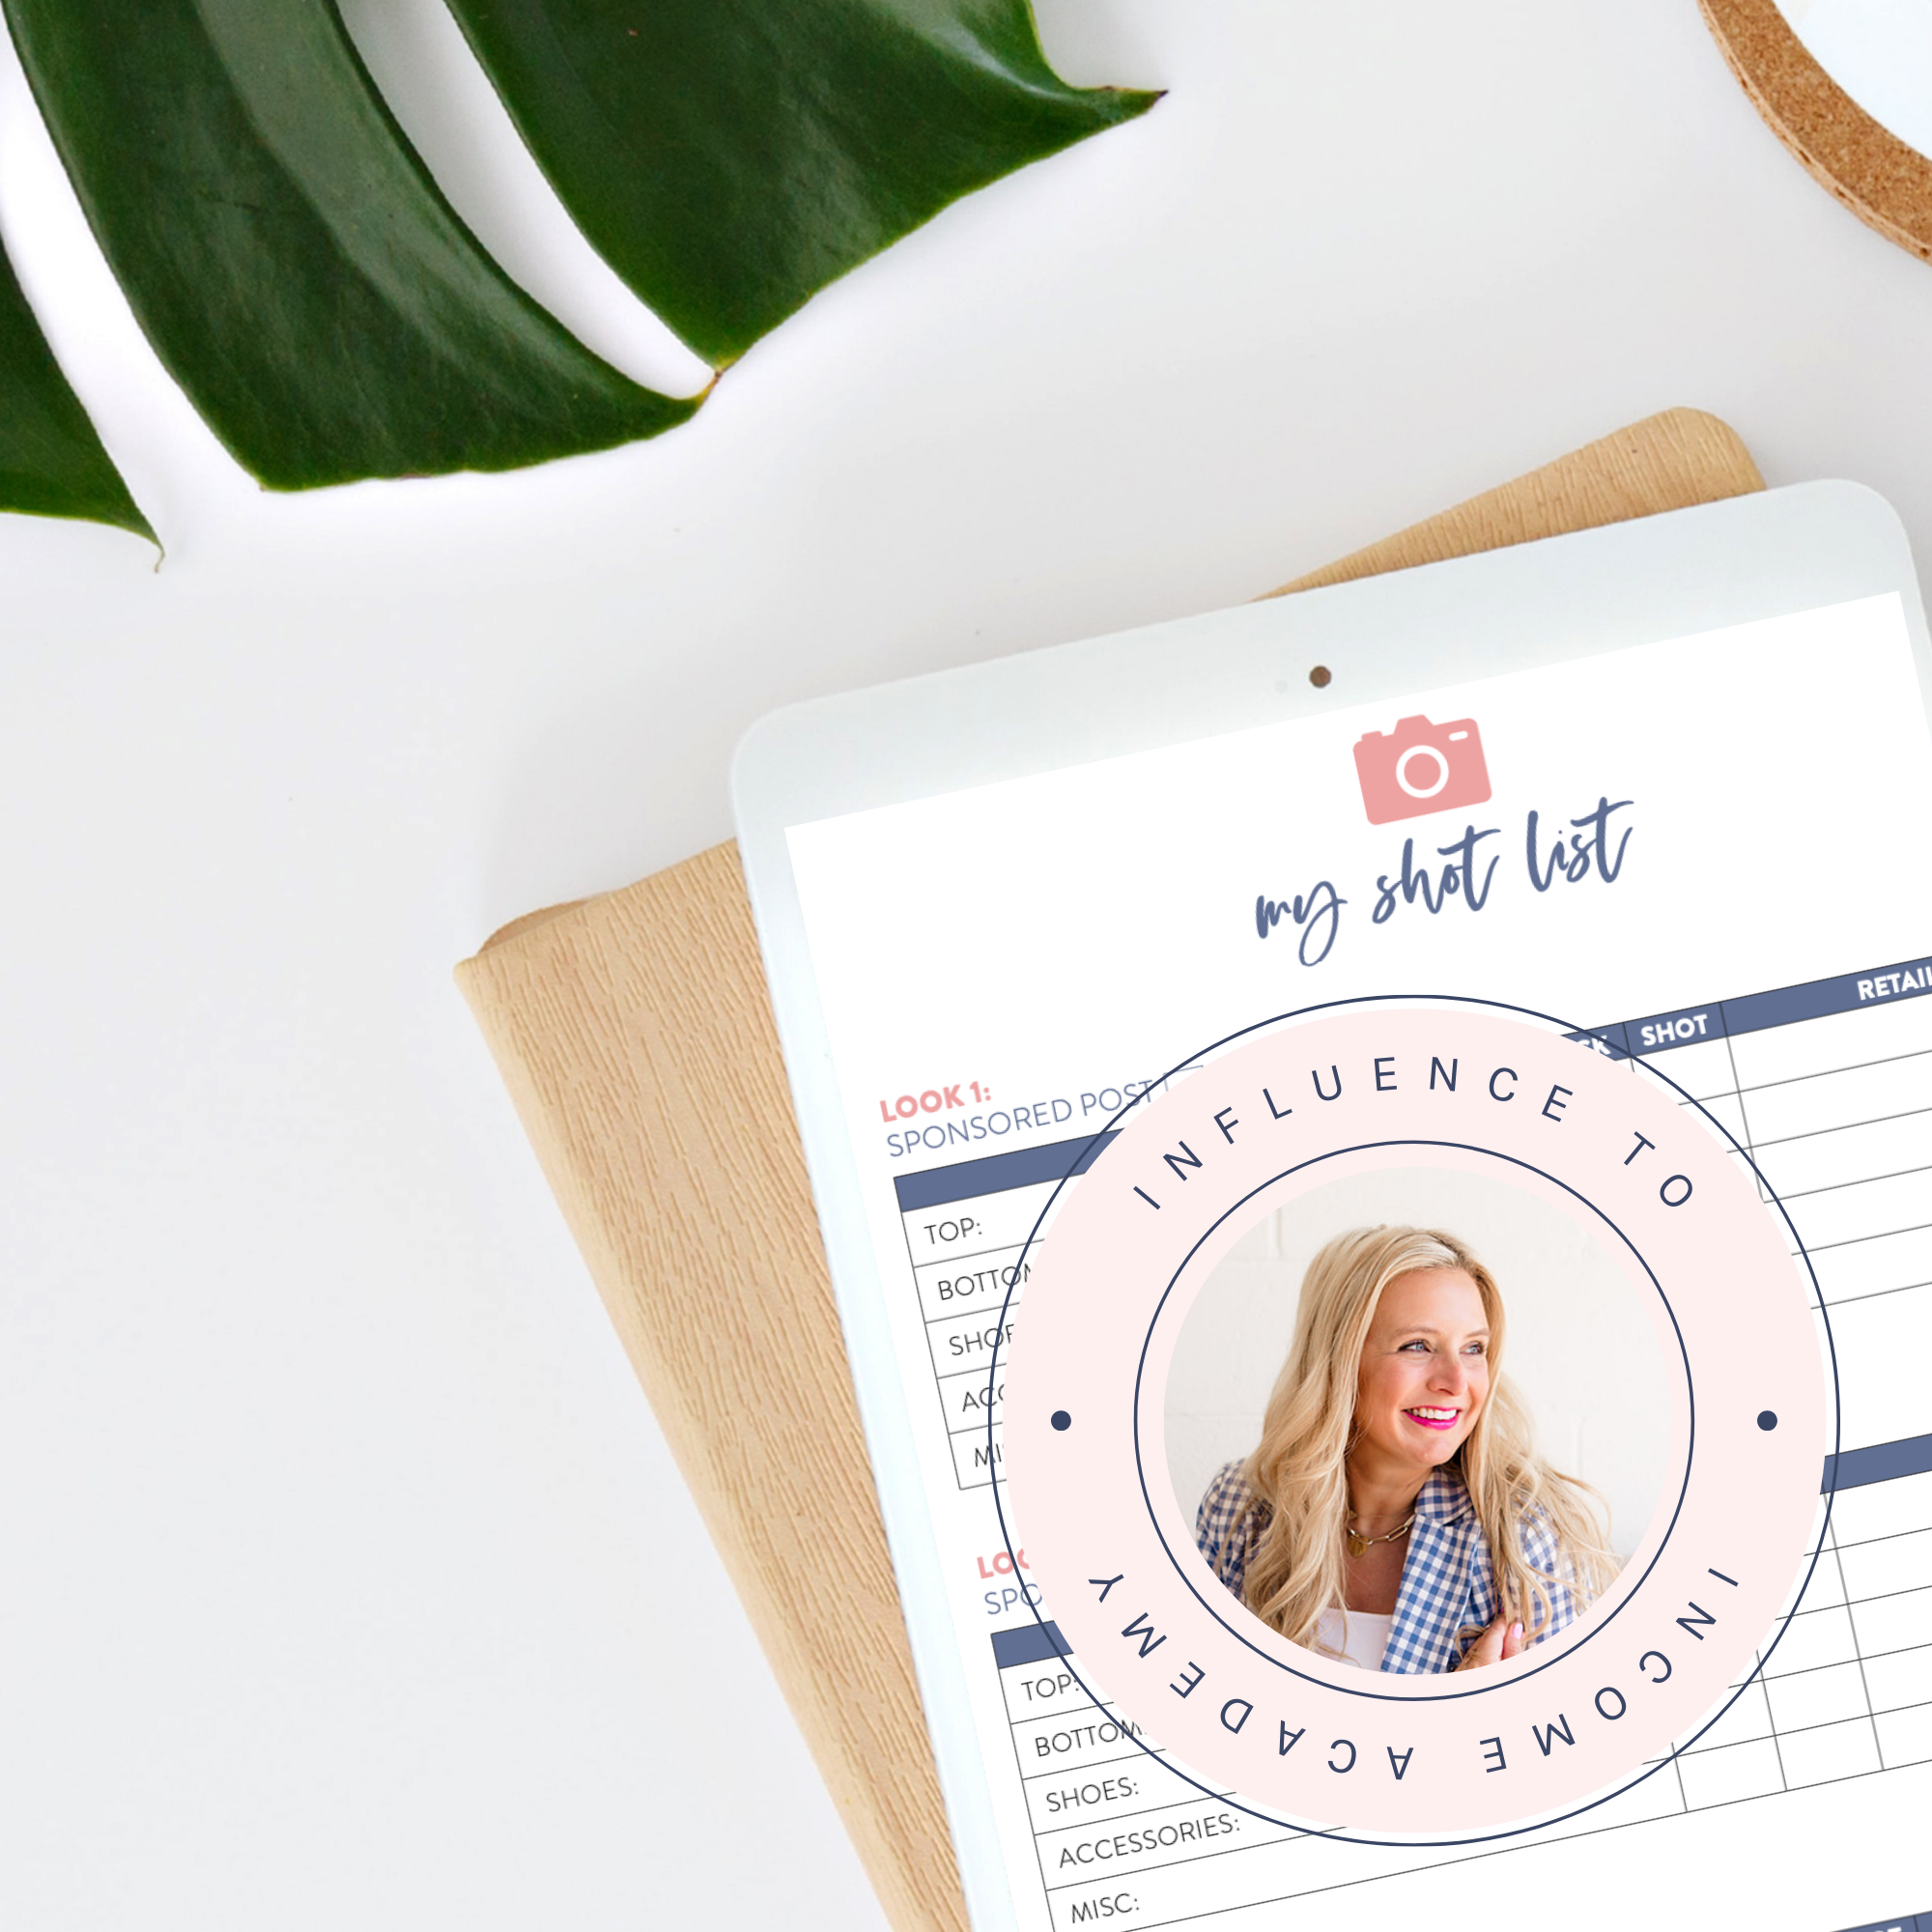 Fancy Ashley Photoshoot Checklist for bloggers & influencers